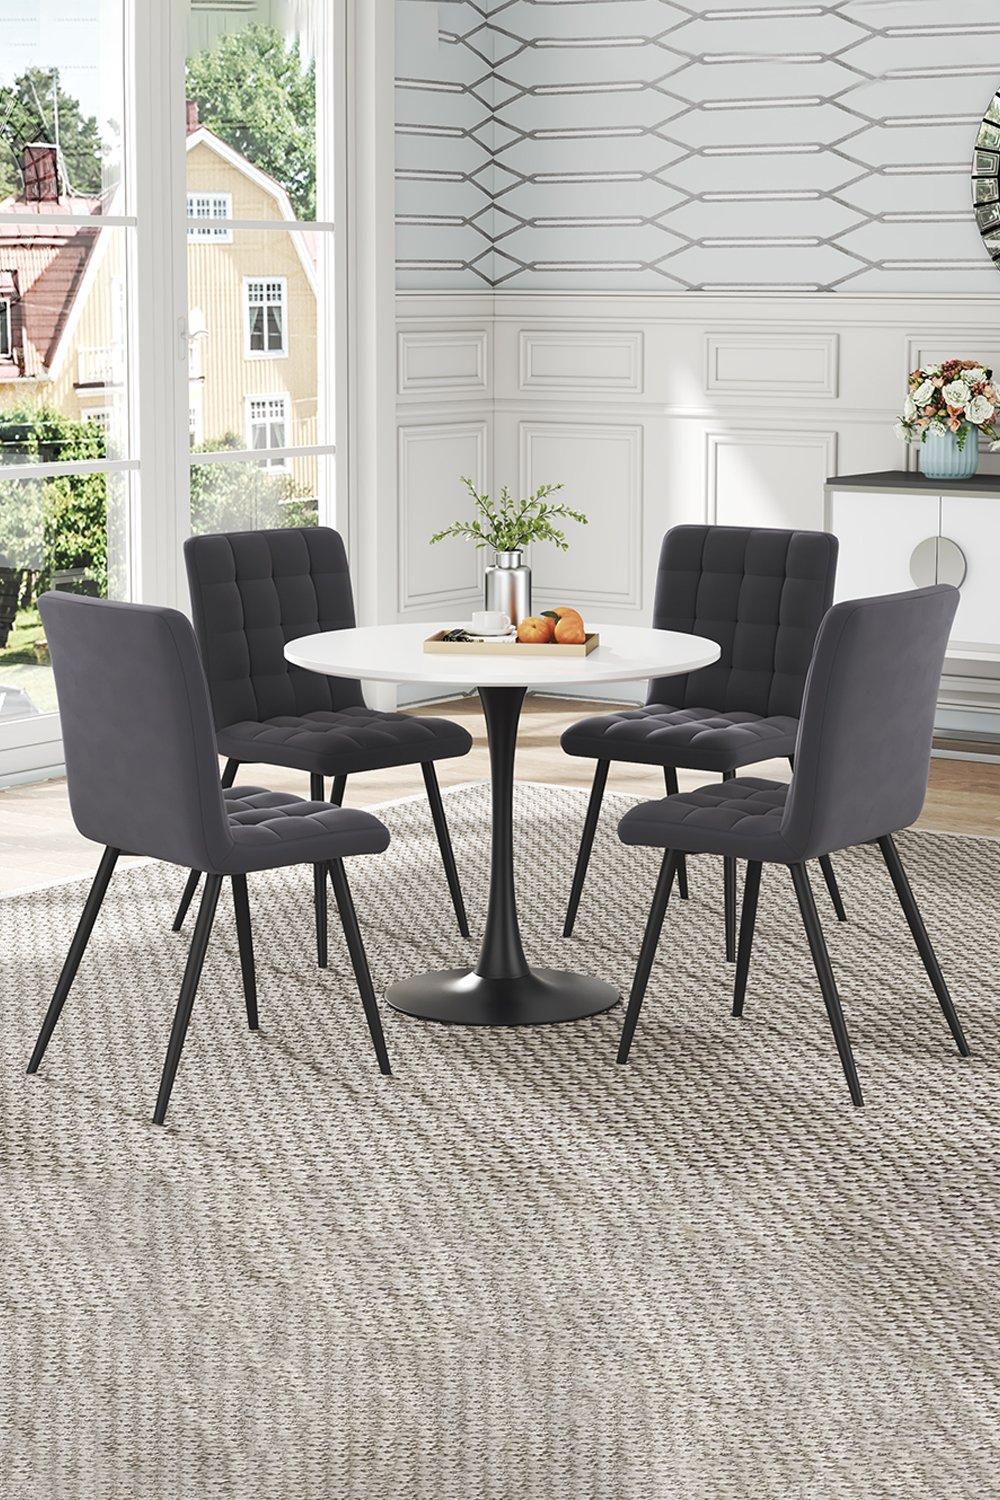 5pcs Dining Table Set of Tufted Dining Chairs and Round Coffee Table